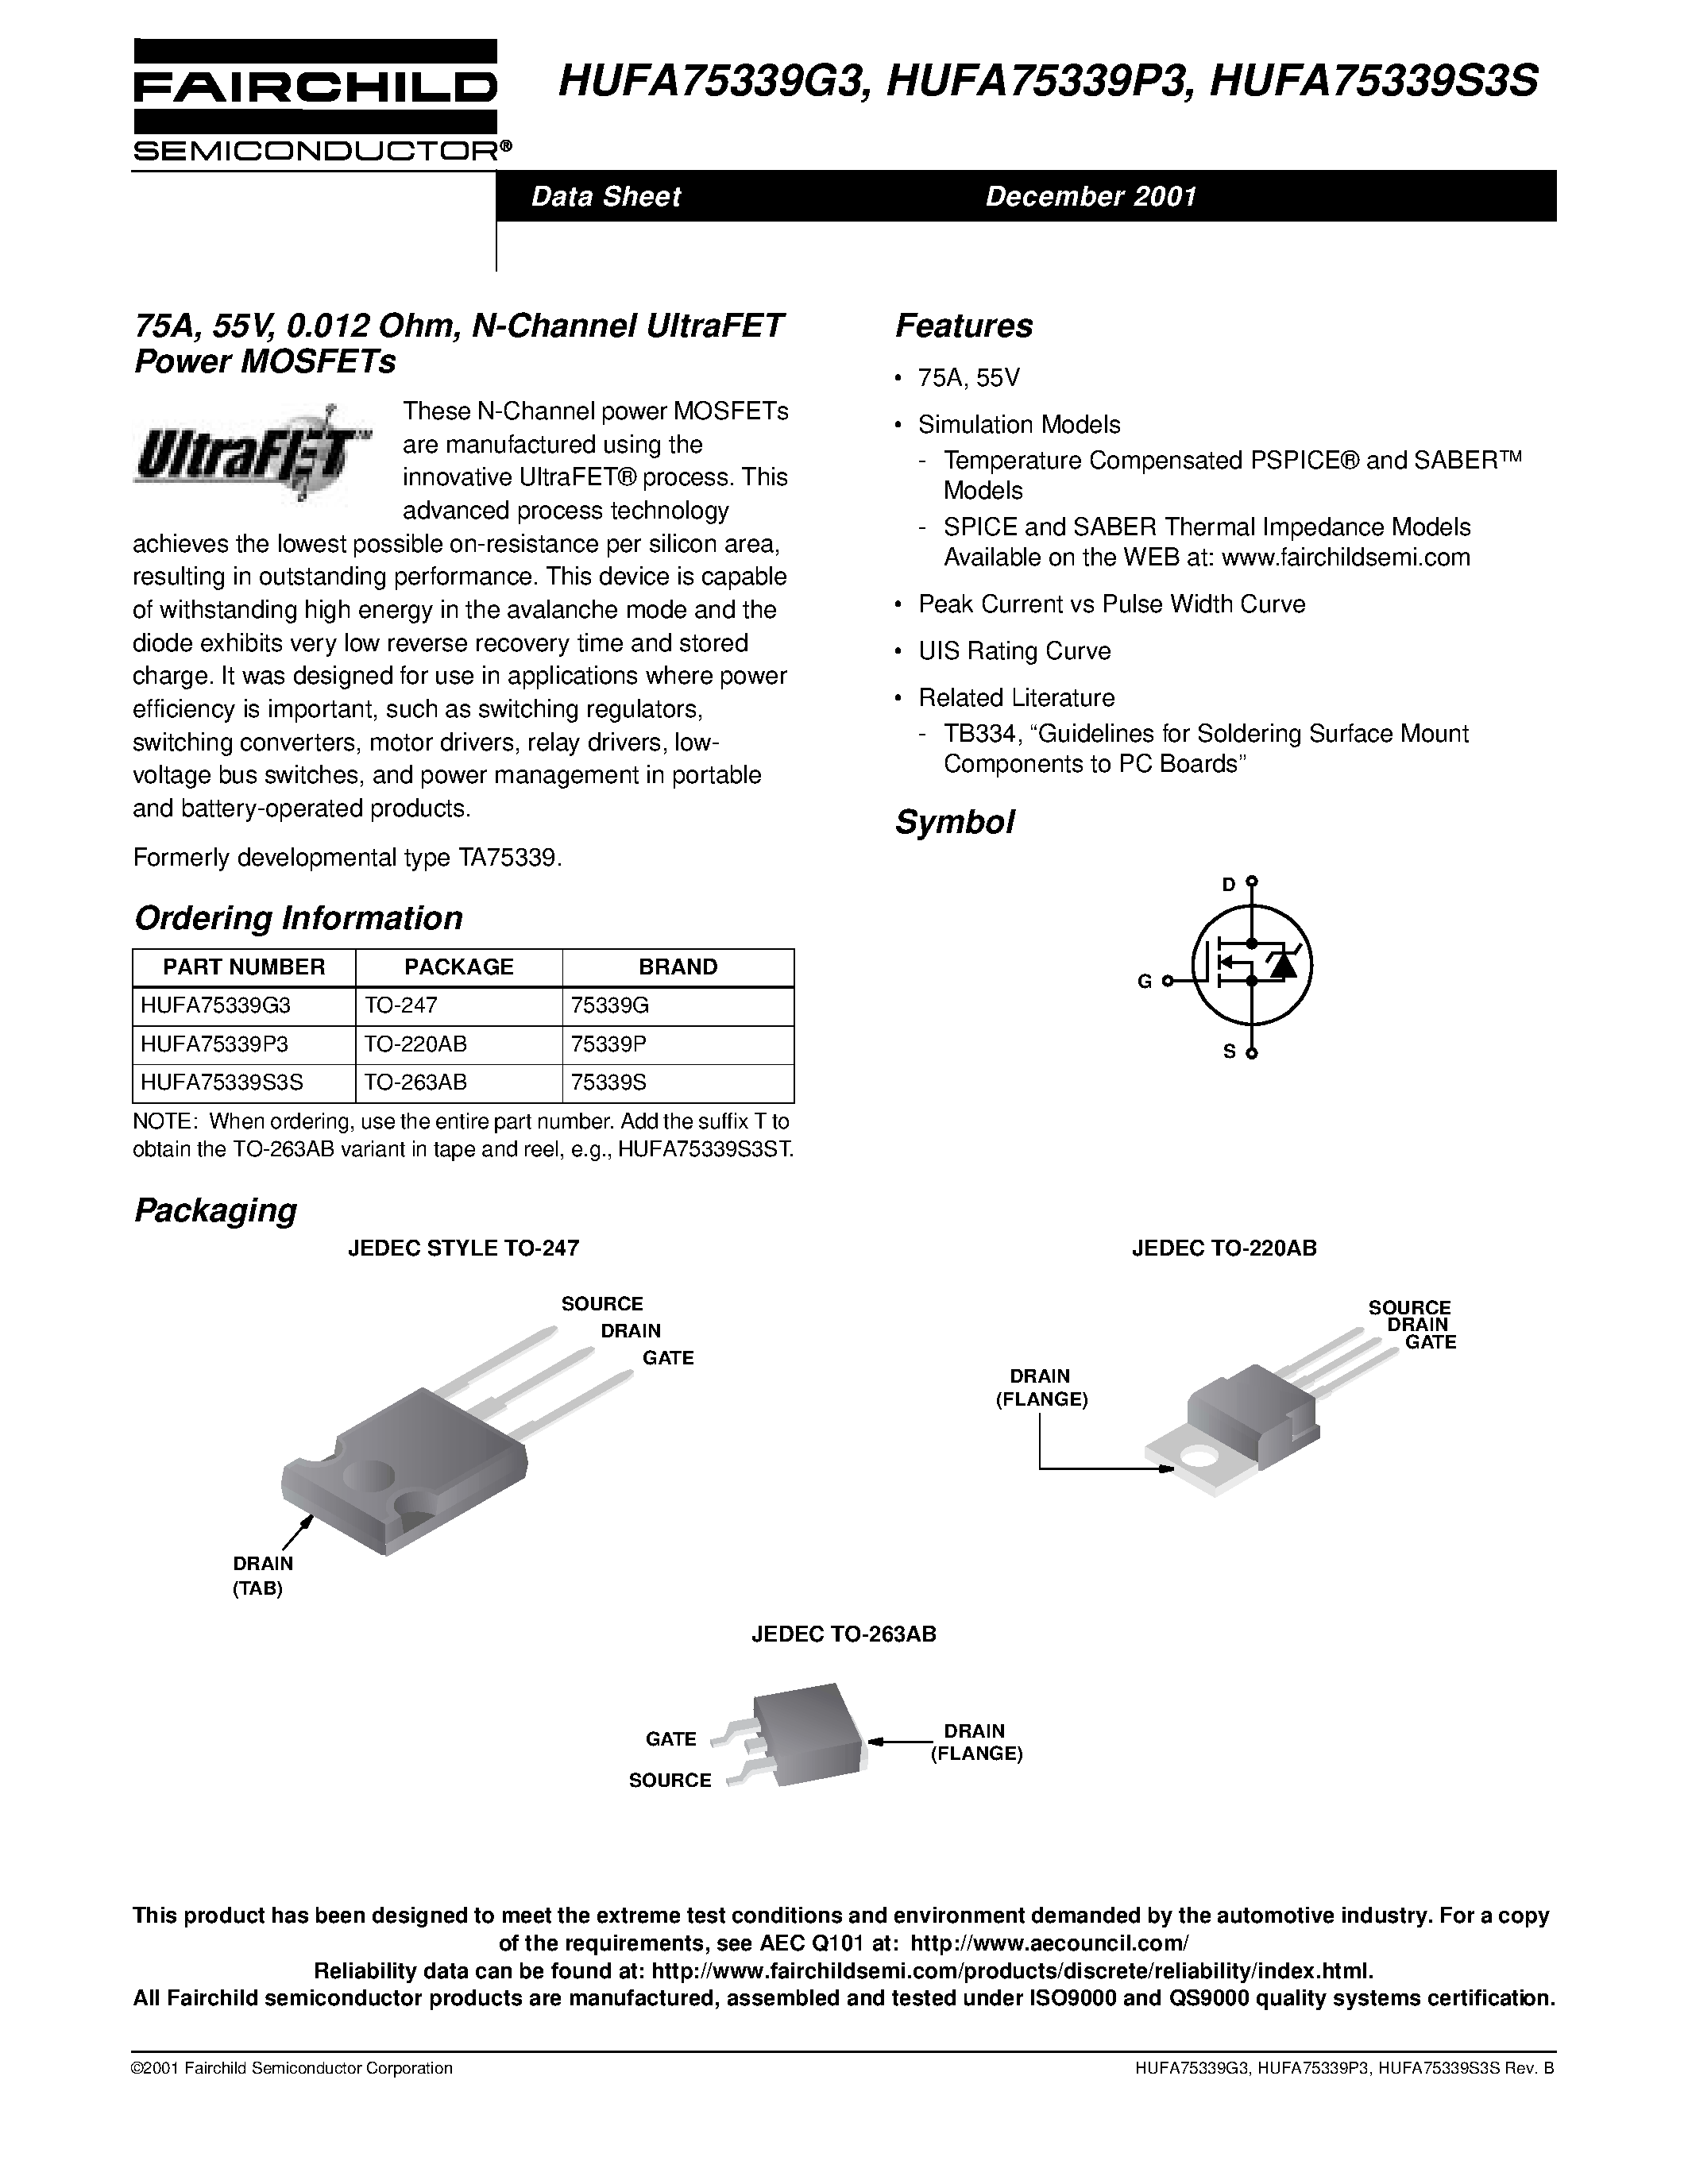 Datasheet HUFA75339P3 - 75A/ 55V/ 0.012 Ohm/ N-Channel UltraFET Power MOSFETs page 1